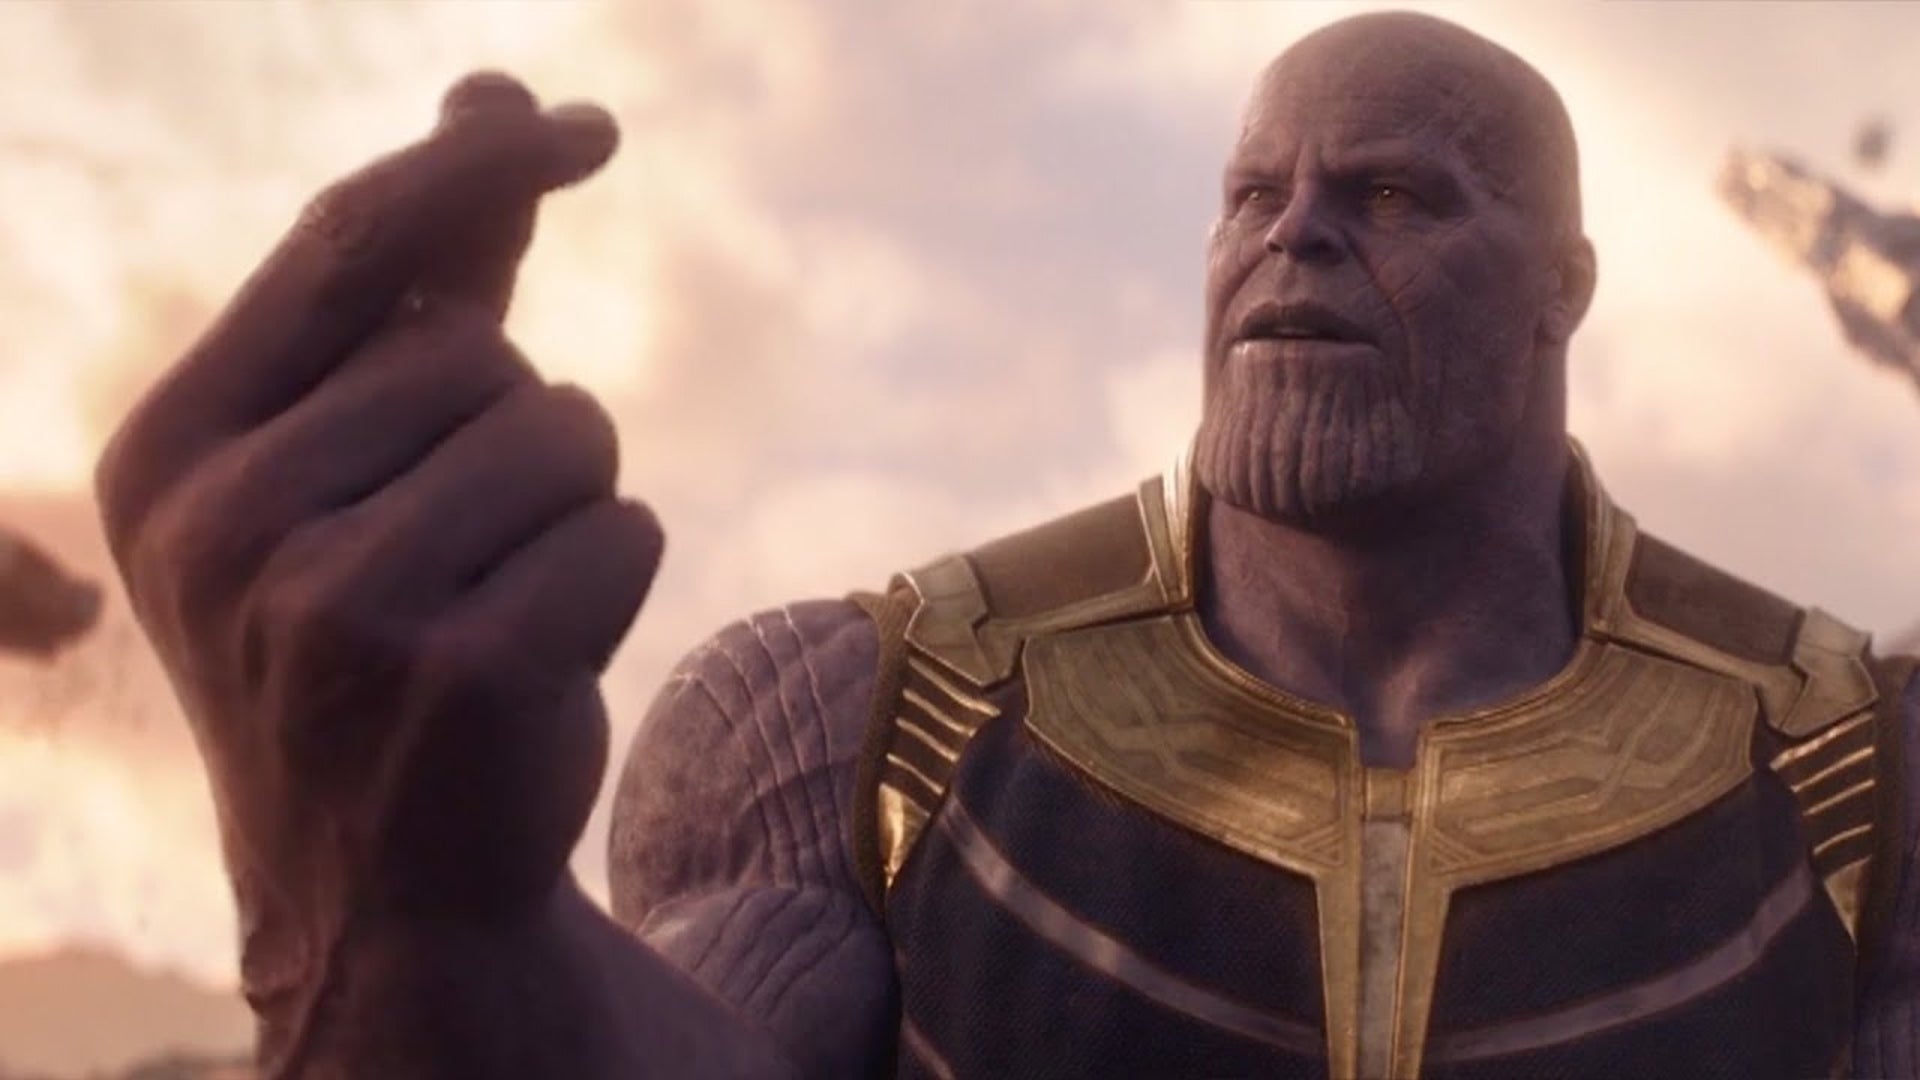 Thanos snapping his fingers